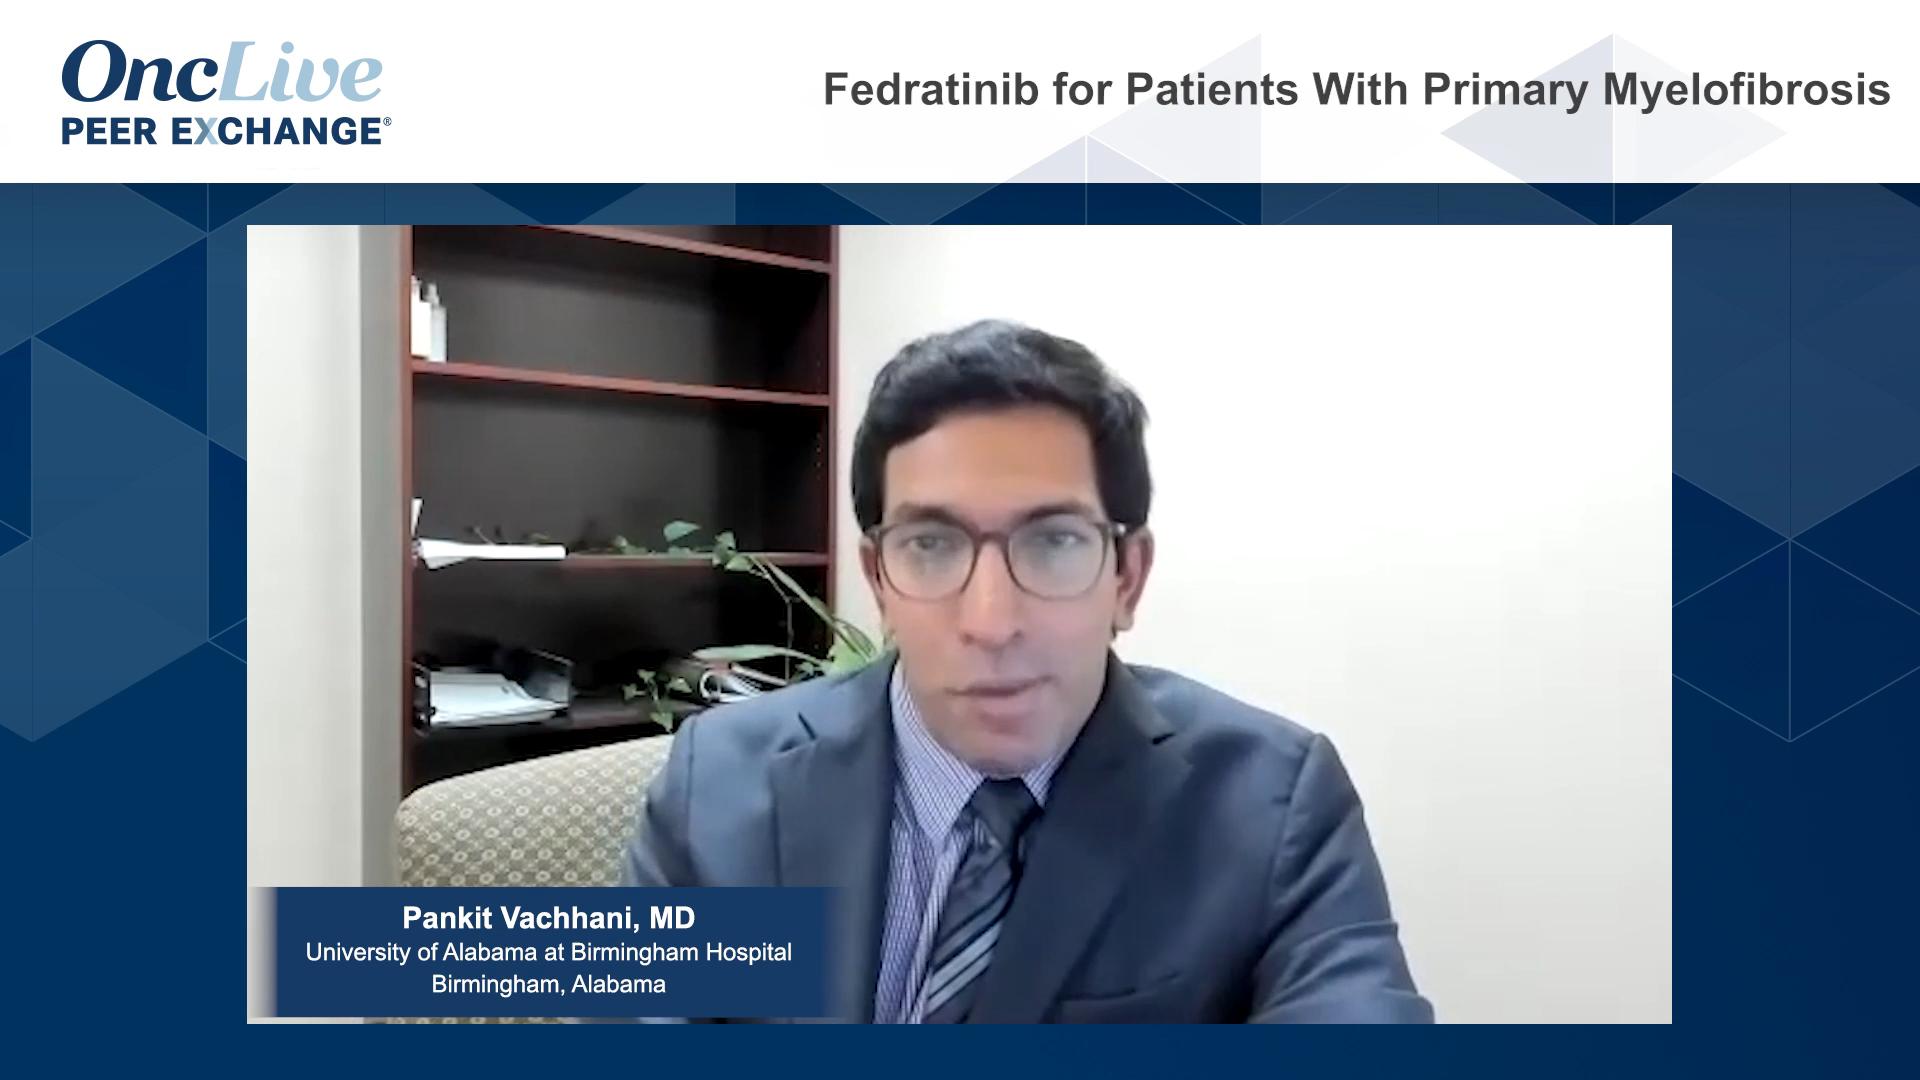 Fedratinib for Patients With Primary Myelofibrosis